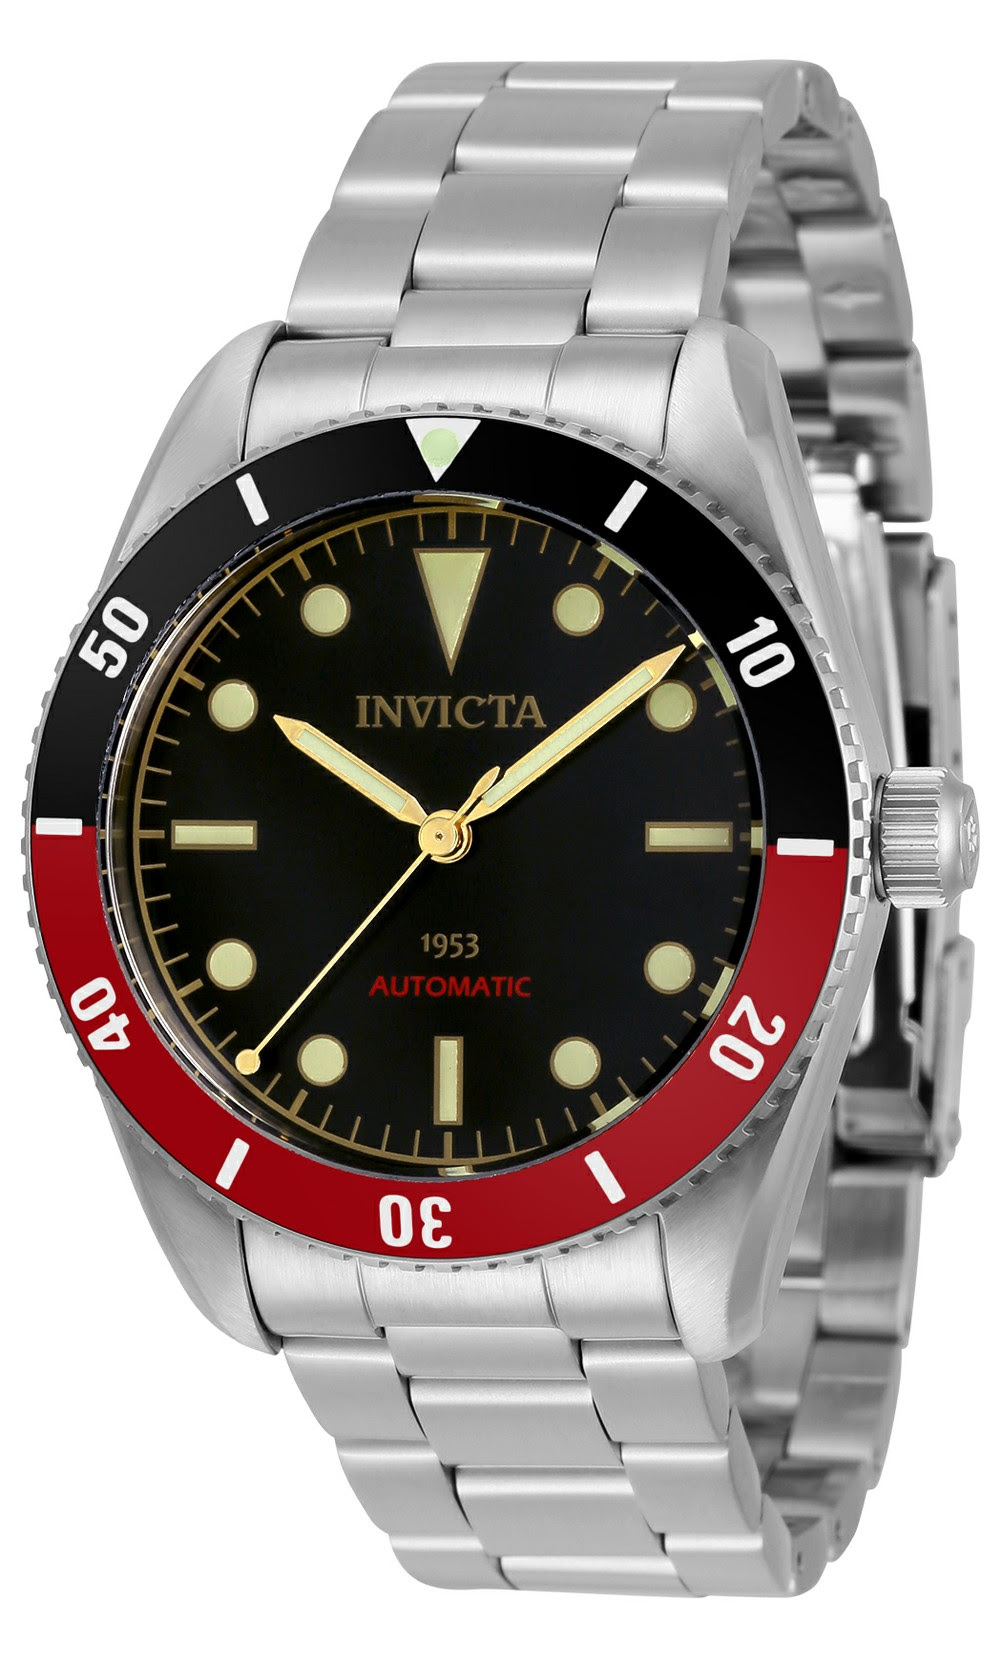 Invicta Pro Diver Automatic Men's Watch - 40mm Stainless Steel Case, Stainless Steel Band, Steel (34334)